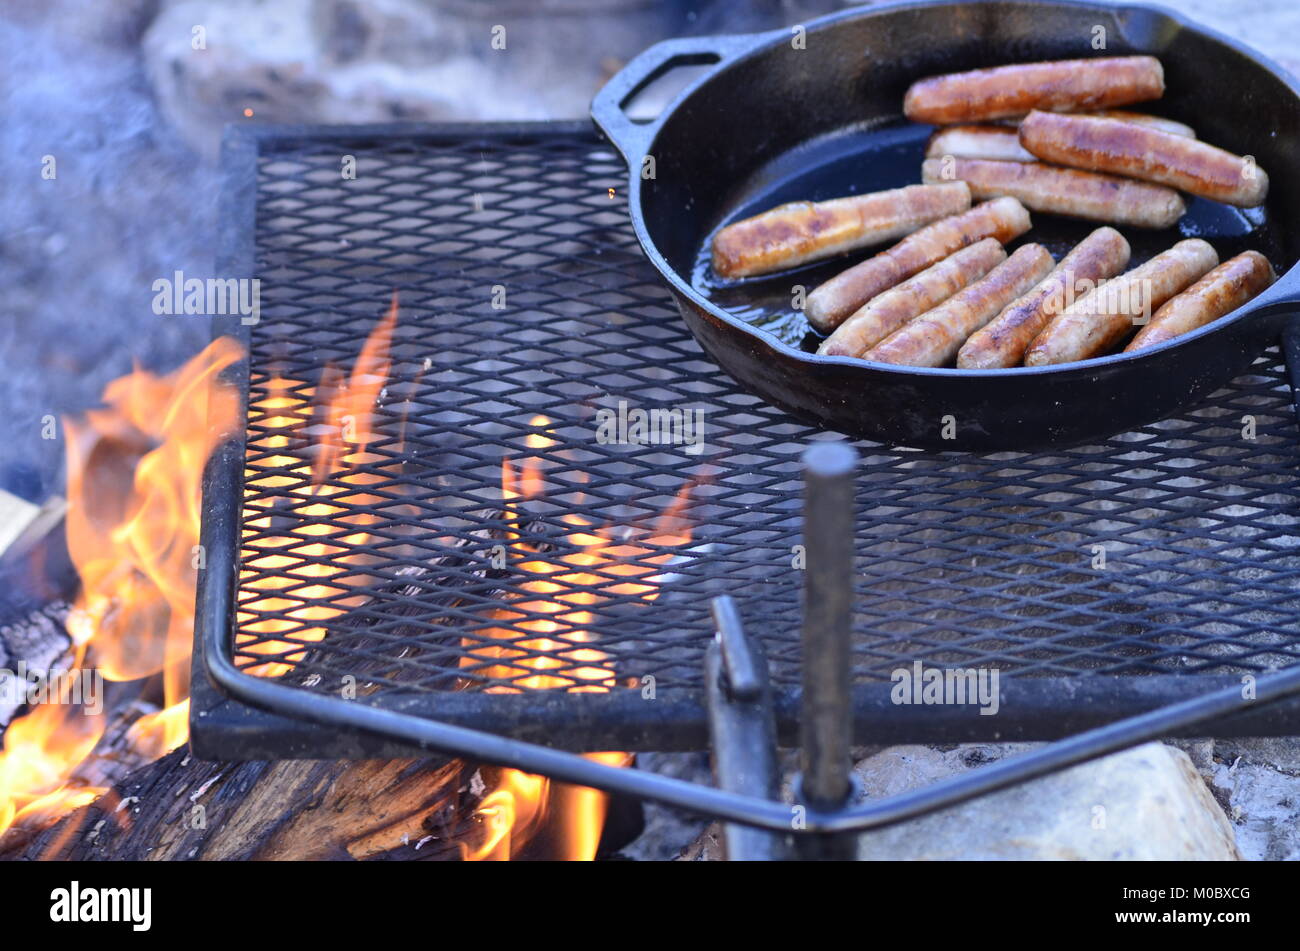 Cooking breakfast sausages over a campfire in a cast iron frying pan Stock Photo